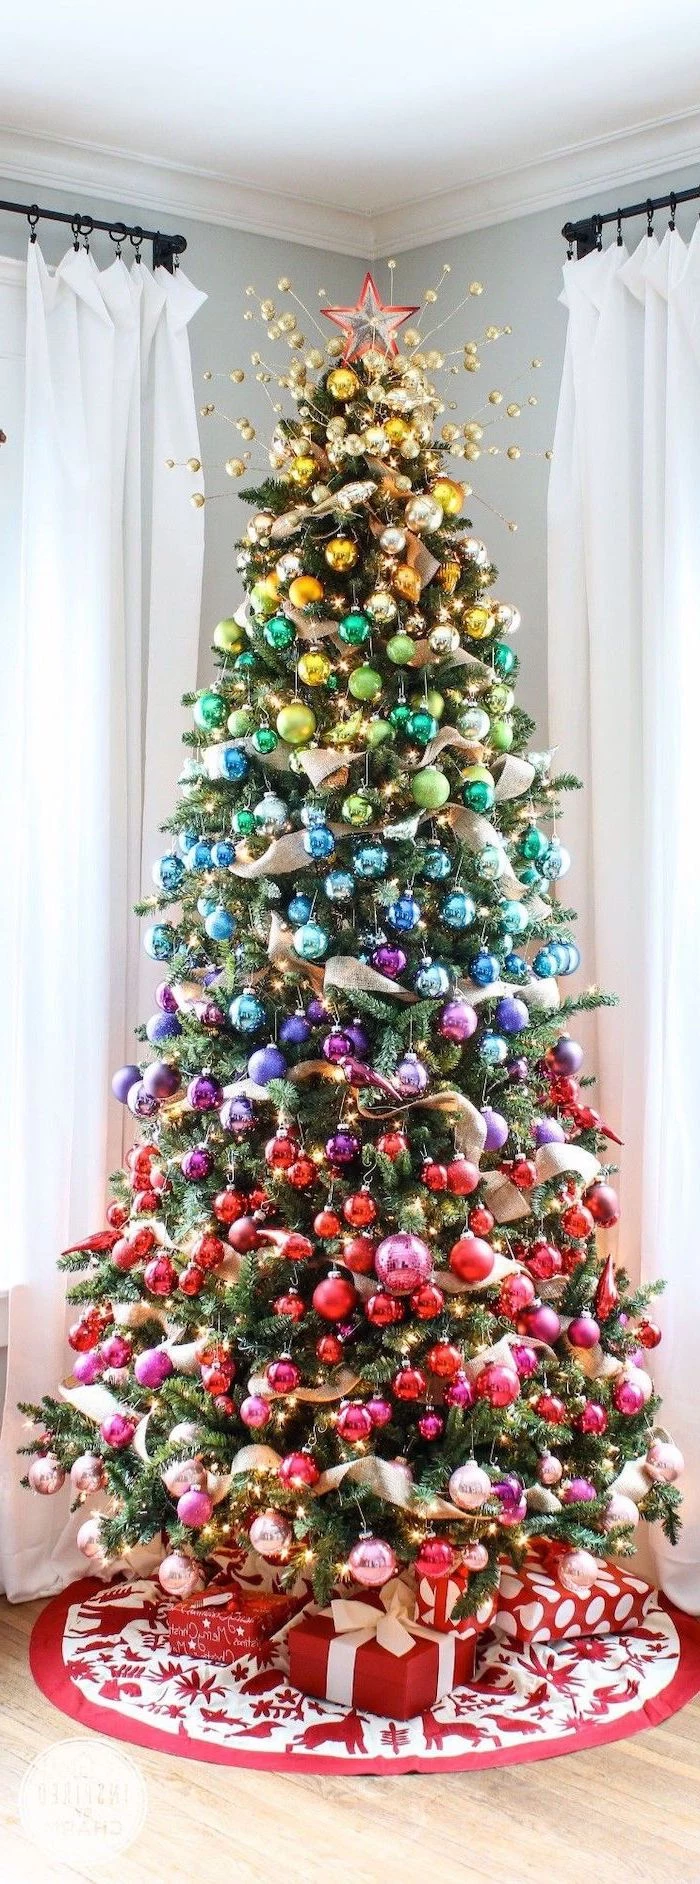 tall tree decorated in gradients colors of the rainbow, christmas tree ribbon, wrapped presents underneath